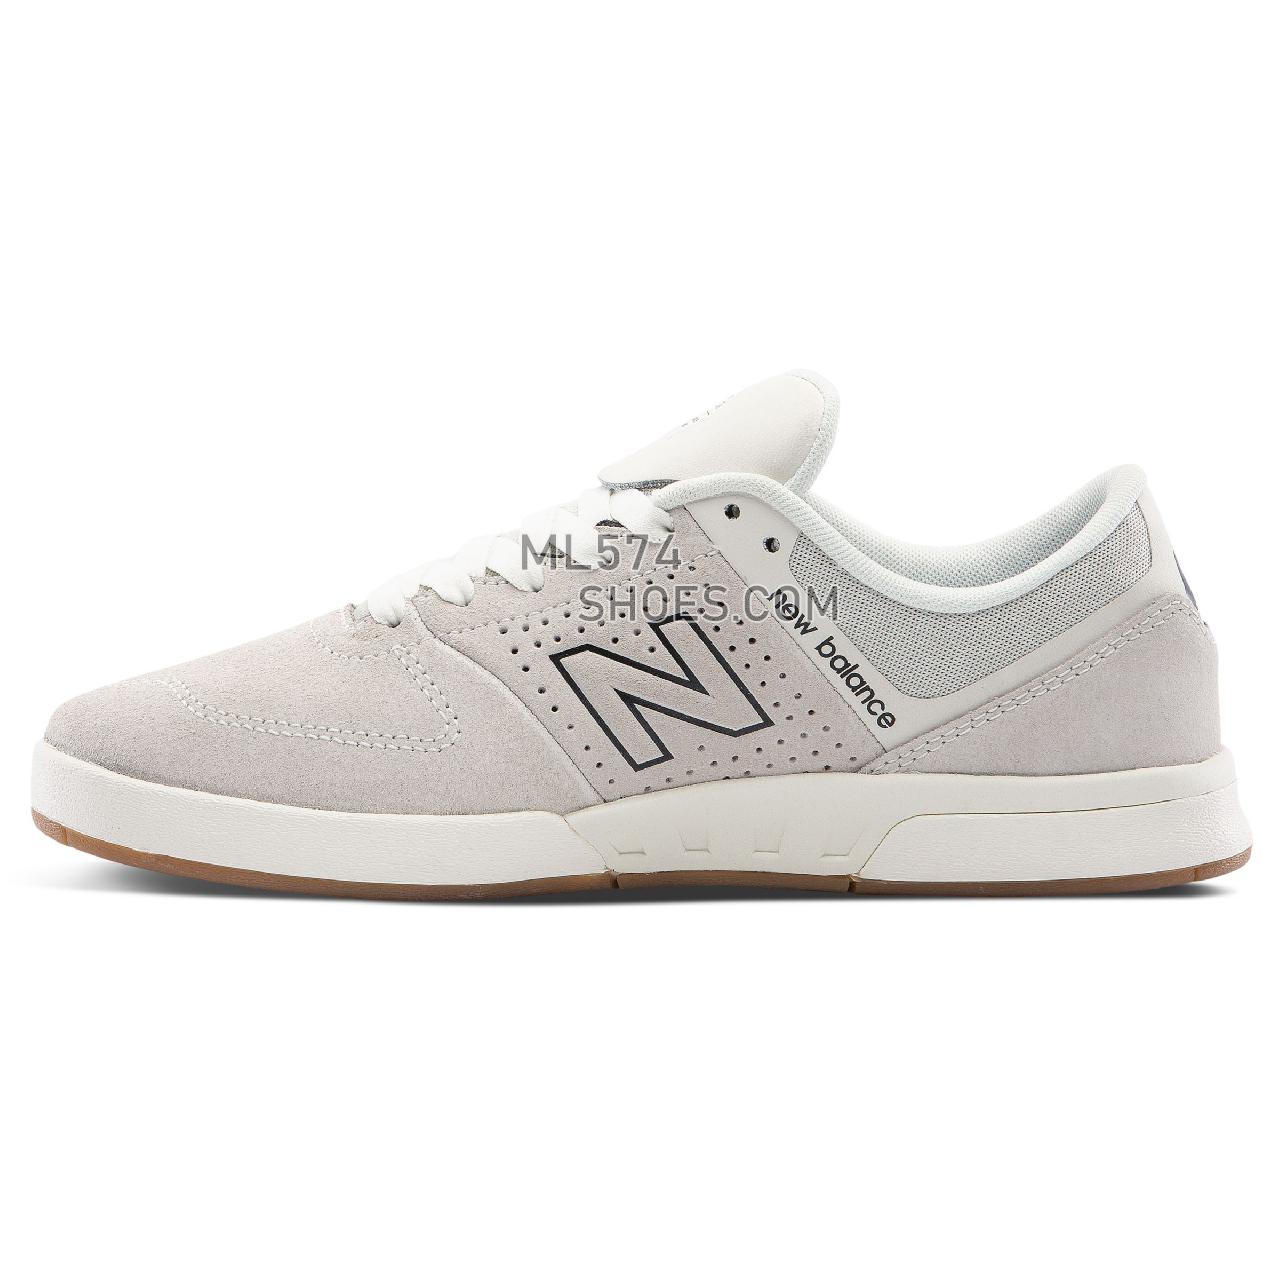 New Balance PJ Ladd 533 v2 - Men's 533 - Classic White with White Exotic - NM533NG2